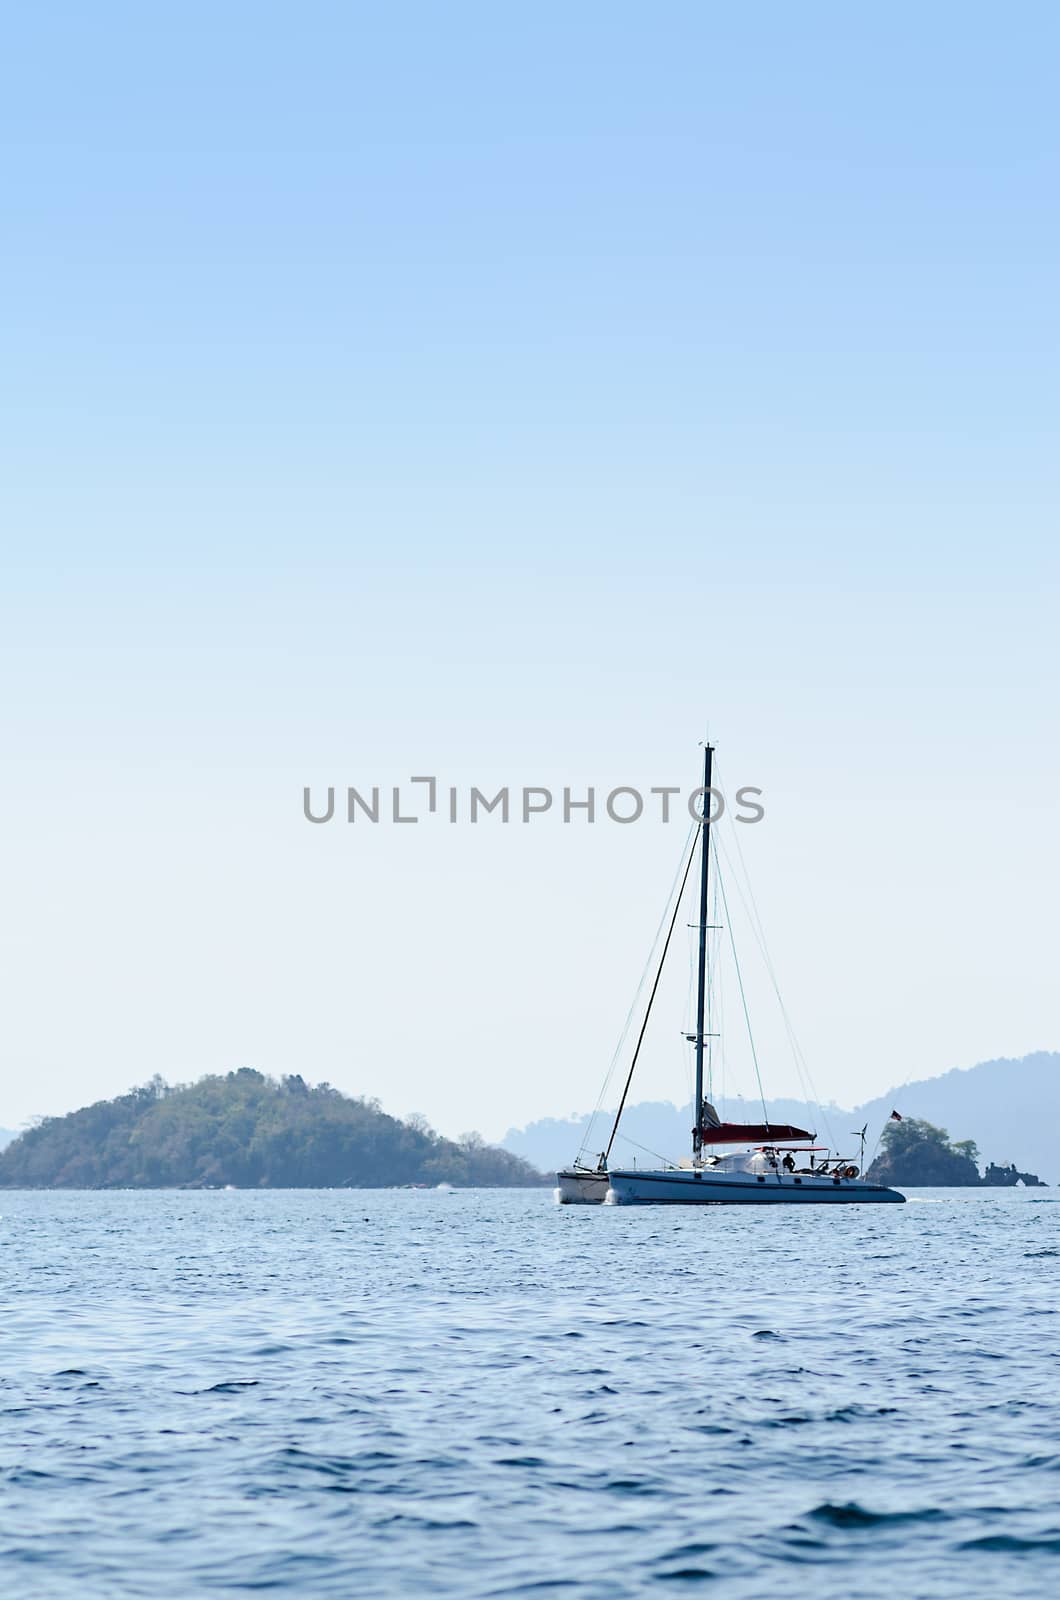 Yatch in the blue sea in Thailand